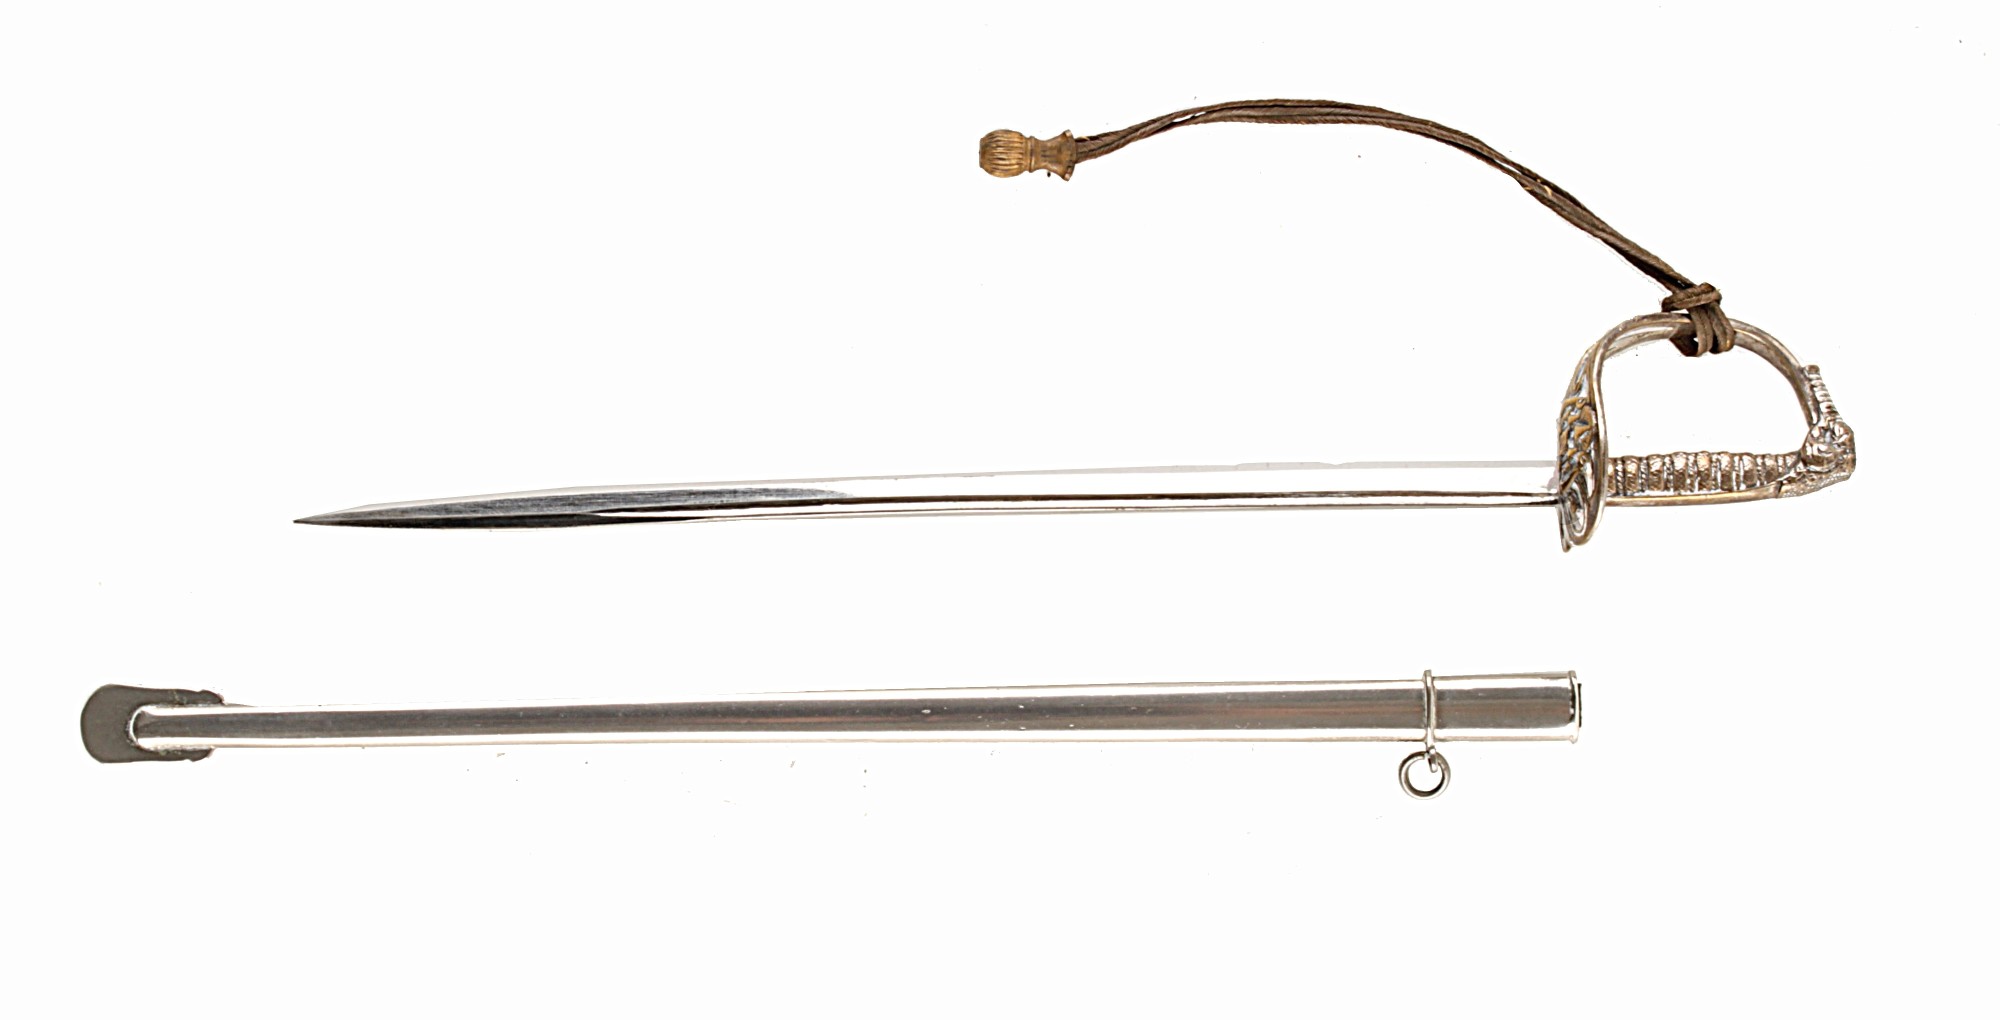 A Rare `Letter-Opener` Miniature Dress Sword, with a polished 7.5cm slightly curved, fullered blade,